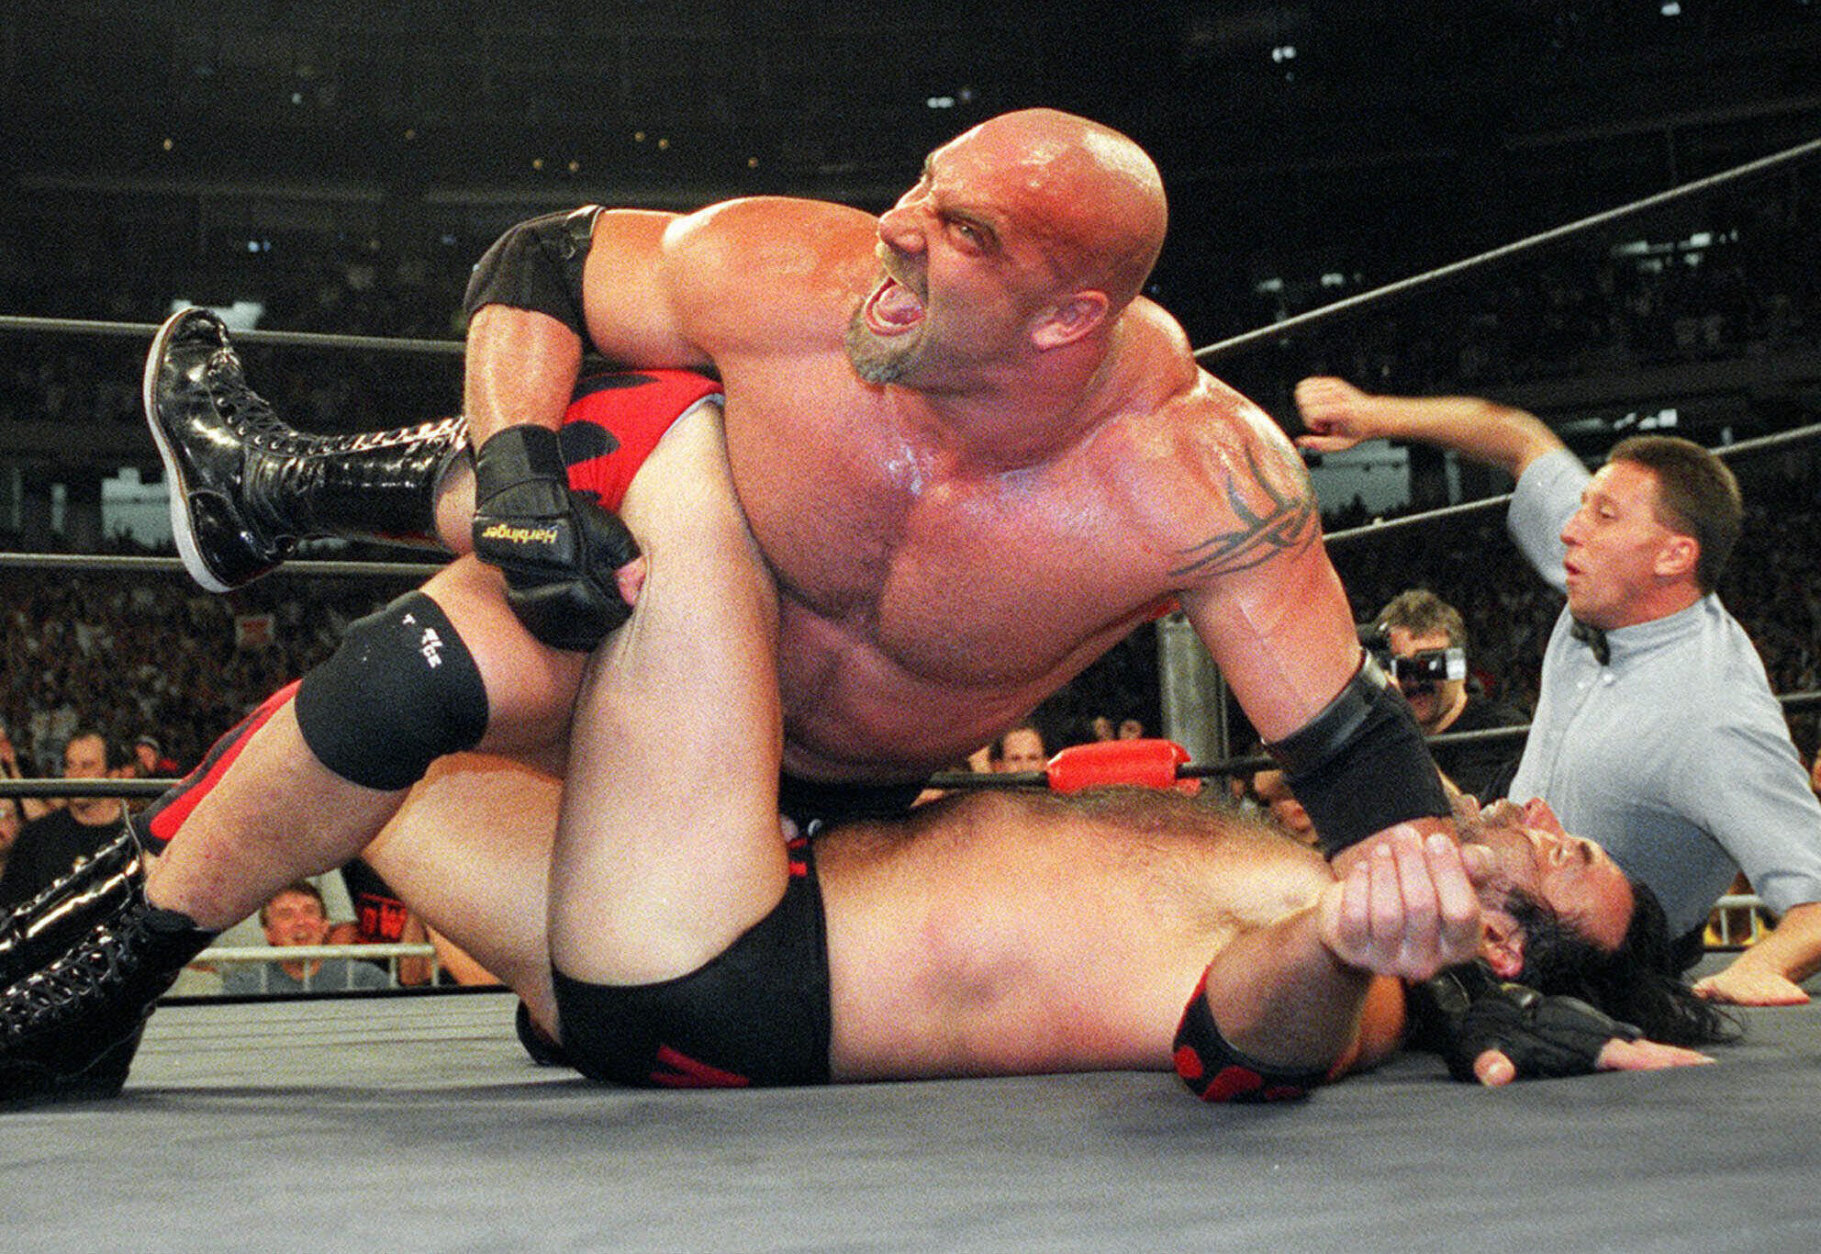 FILE - In this July 6, 1998, file photo, wrestling heavyweight champion Bill Goldberg puts Scott Hall to the mat during a match in Atlanta. Goldberg was seemingly retired, dabbling in acting, and far removed from the days of his reign as undefeated champion in WCW or WrestleMania winner for WWE. The 54-year-old Goldberg returns for his second match of the year when he challenges Bobby Lashley for the WWE title Saturday night, Aug. 21, 2021, at SummerSlam at Allegiant Stadium. (AP Photo/Erik S. Lesser, File)